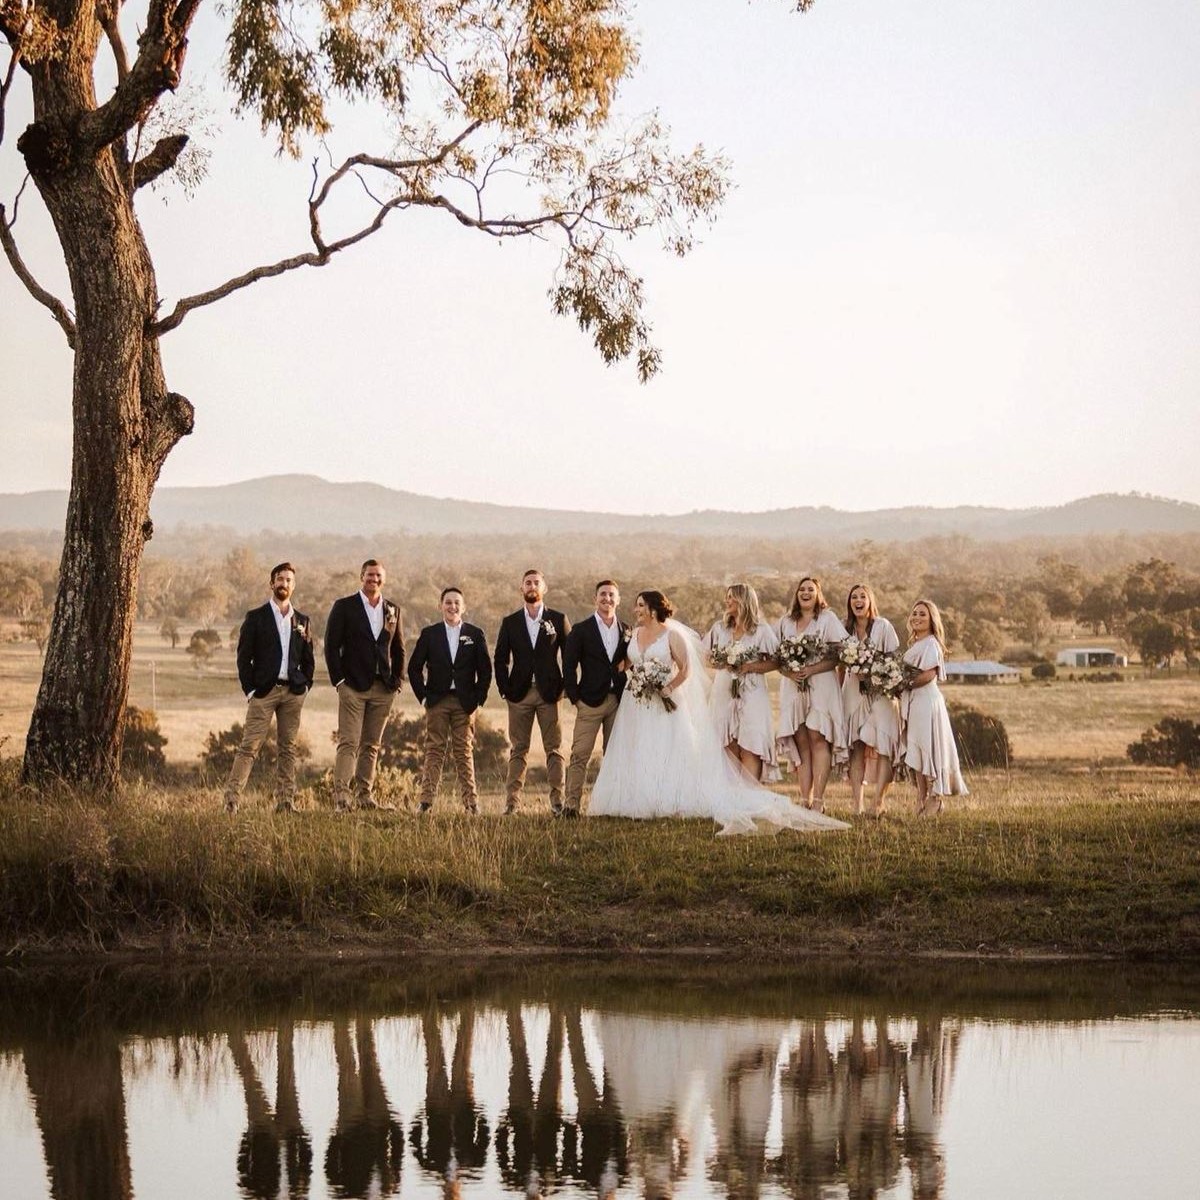 Wedding venues in Toowoomba worth checking out